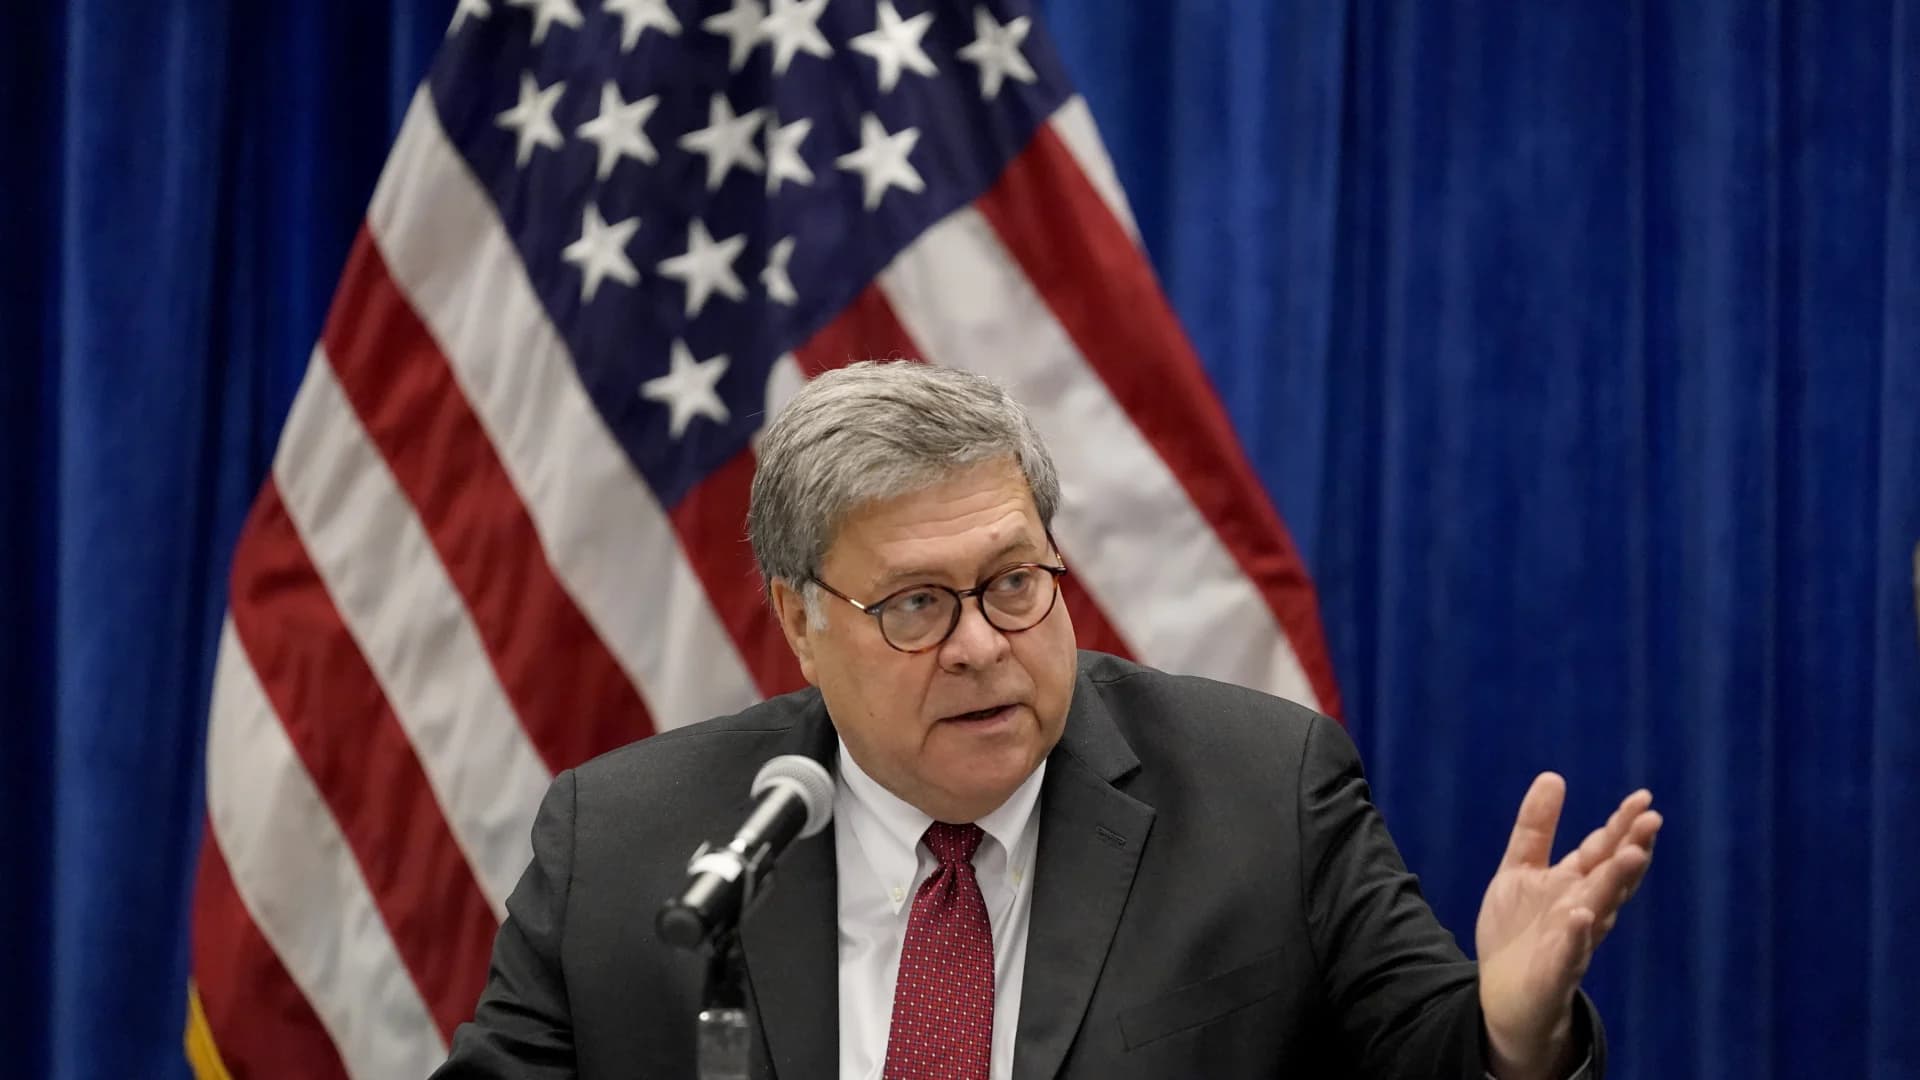 Trump says Barr resigning, will leave before Christmas